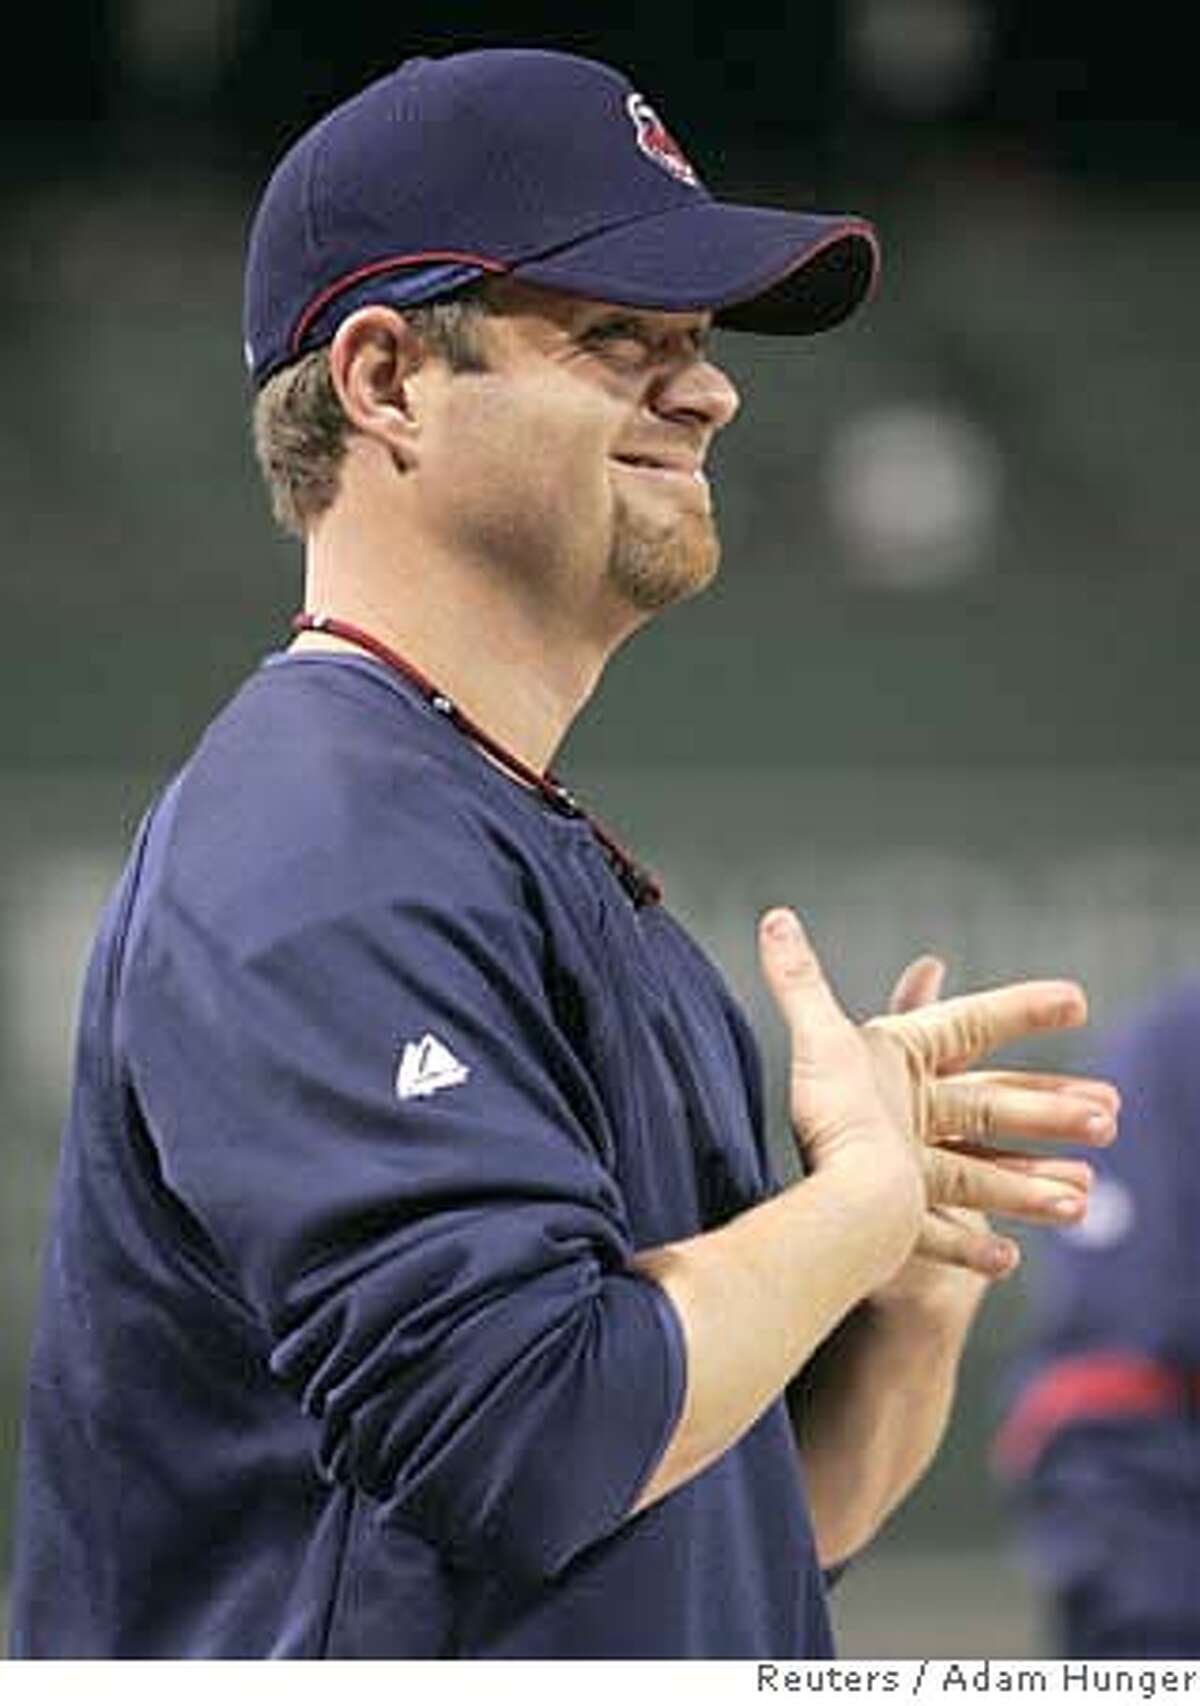 Cleveland Indians pitcher Paul Byrd stands during pre-game warmups before his team plays the Boston Red Sox in Game 7 of Major League Baseball's ALCS playoff series in Boston, Massachusetts October 21 2007. Byrd admitted to using human growth hormone prescribed by his doctors. REUTERS/Adam Hunger (UNITED STATES) 0